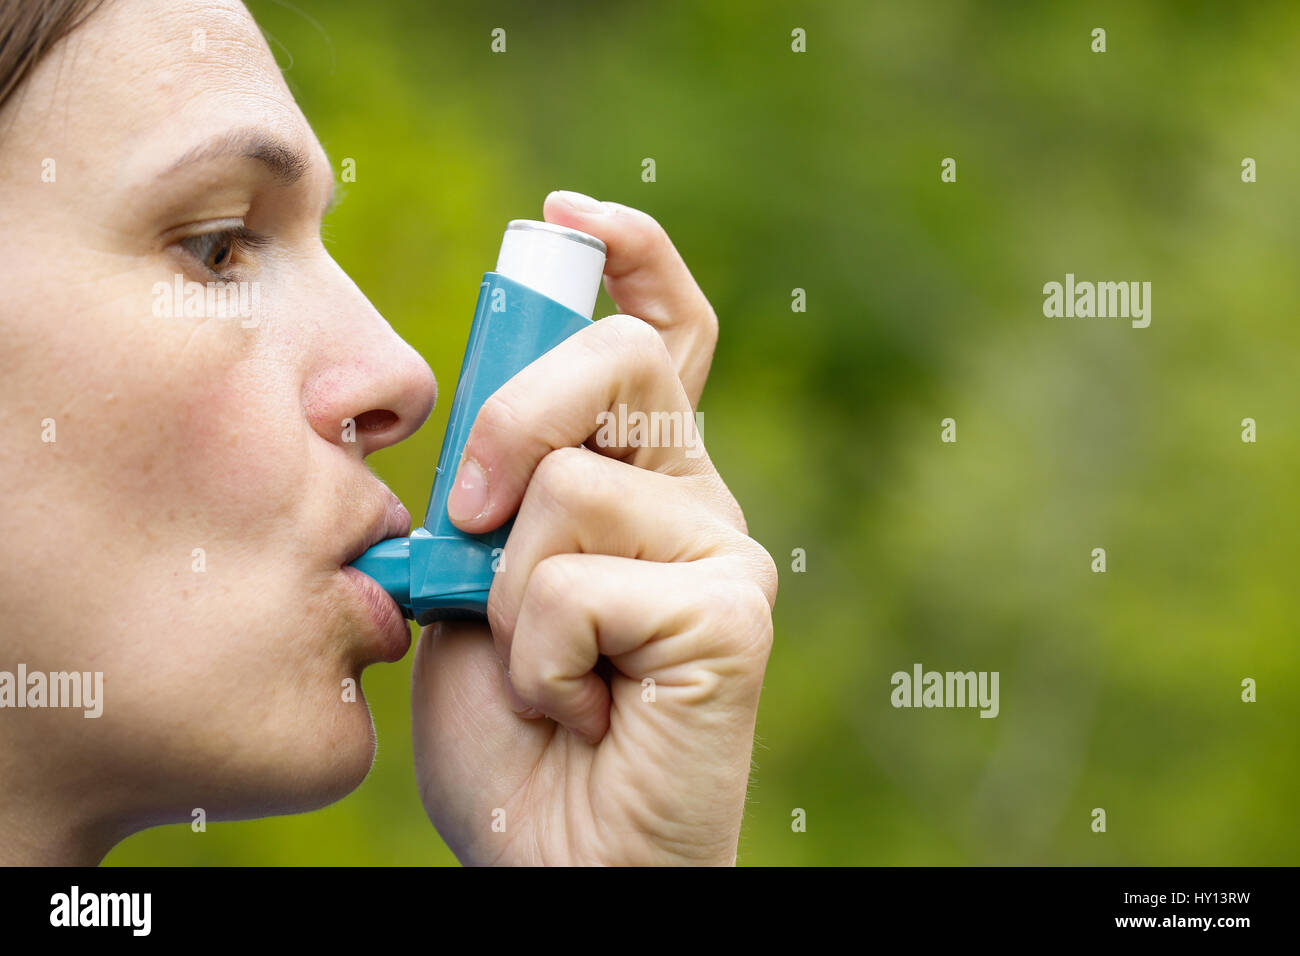 Asthma patient inhaling medication for treating shortness of breath and wheezing. Chronic disease control, allergy induced asthma remedy and chronic p Stock Photo